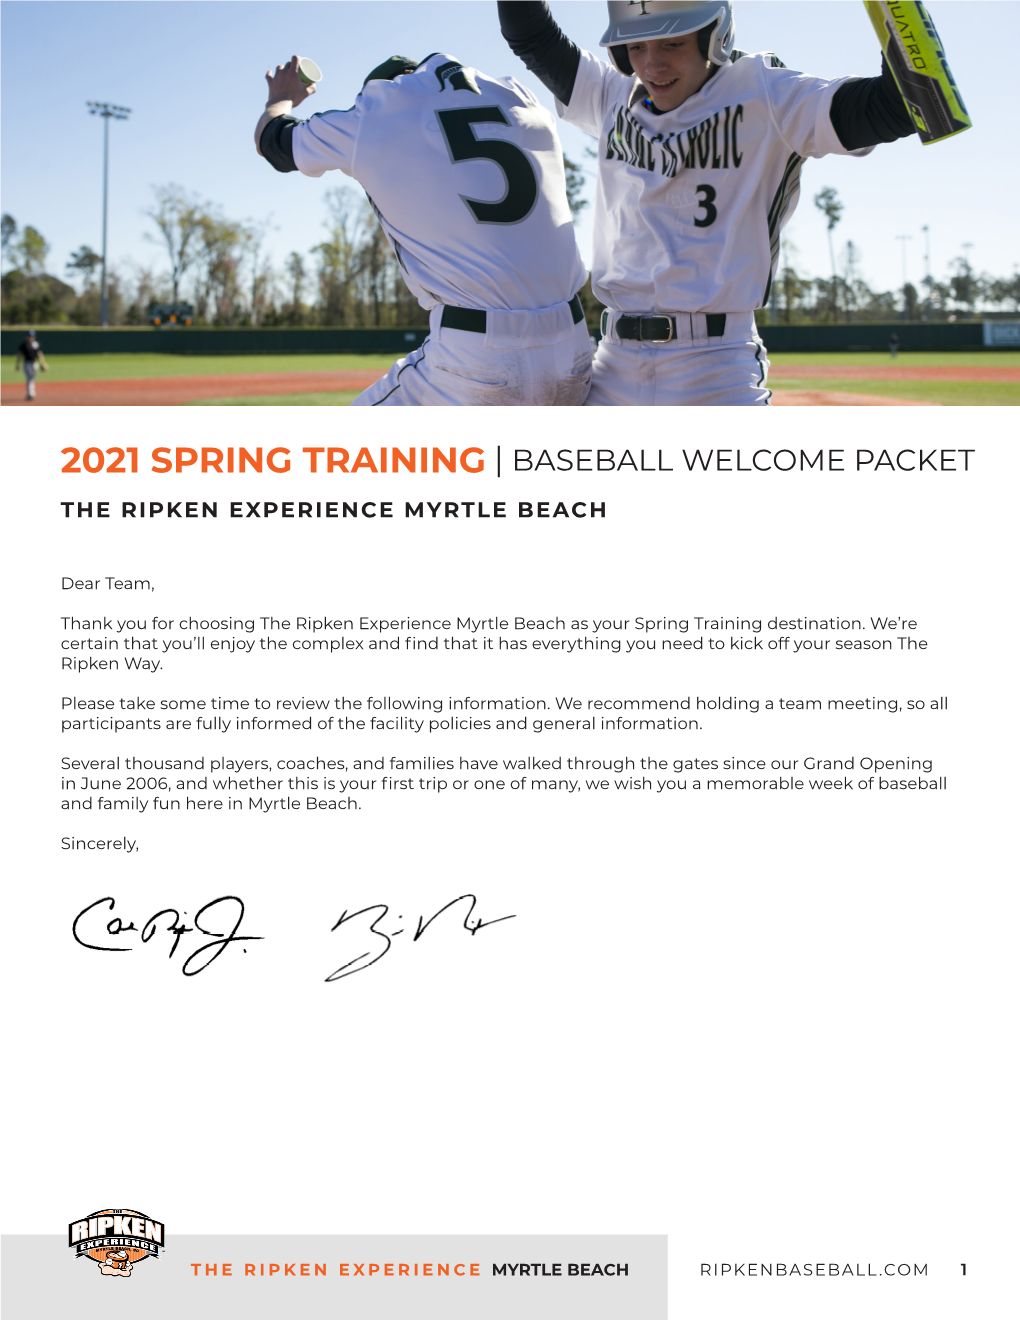 2021 Spring Training | Baseball Welcome Packet the Ripken Experience Myrtle Beach